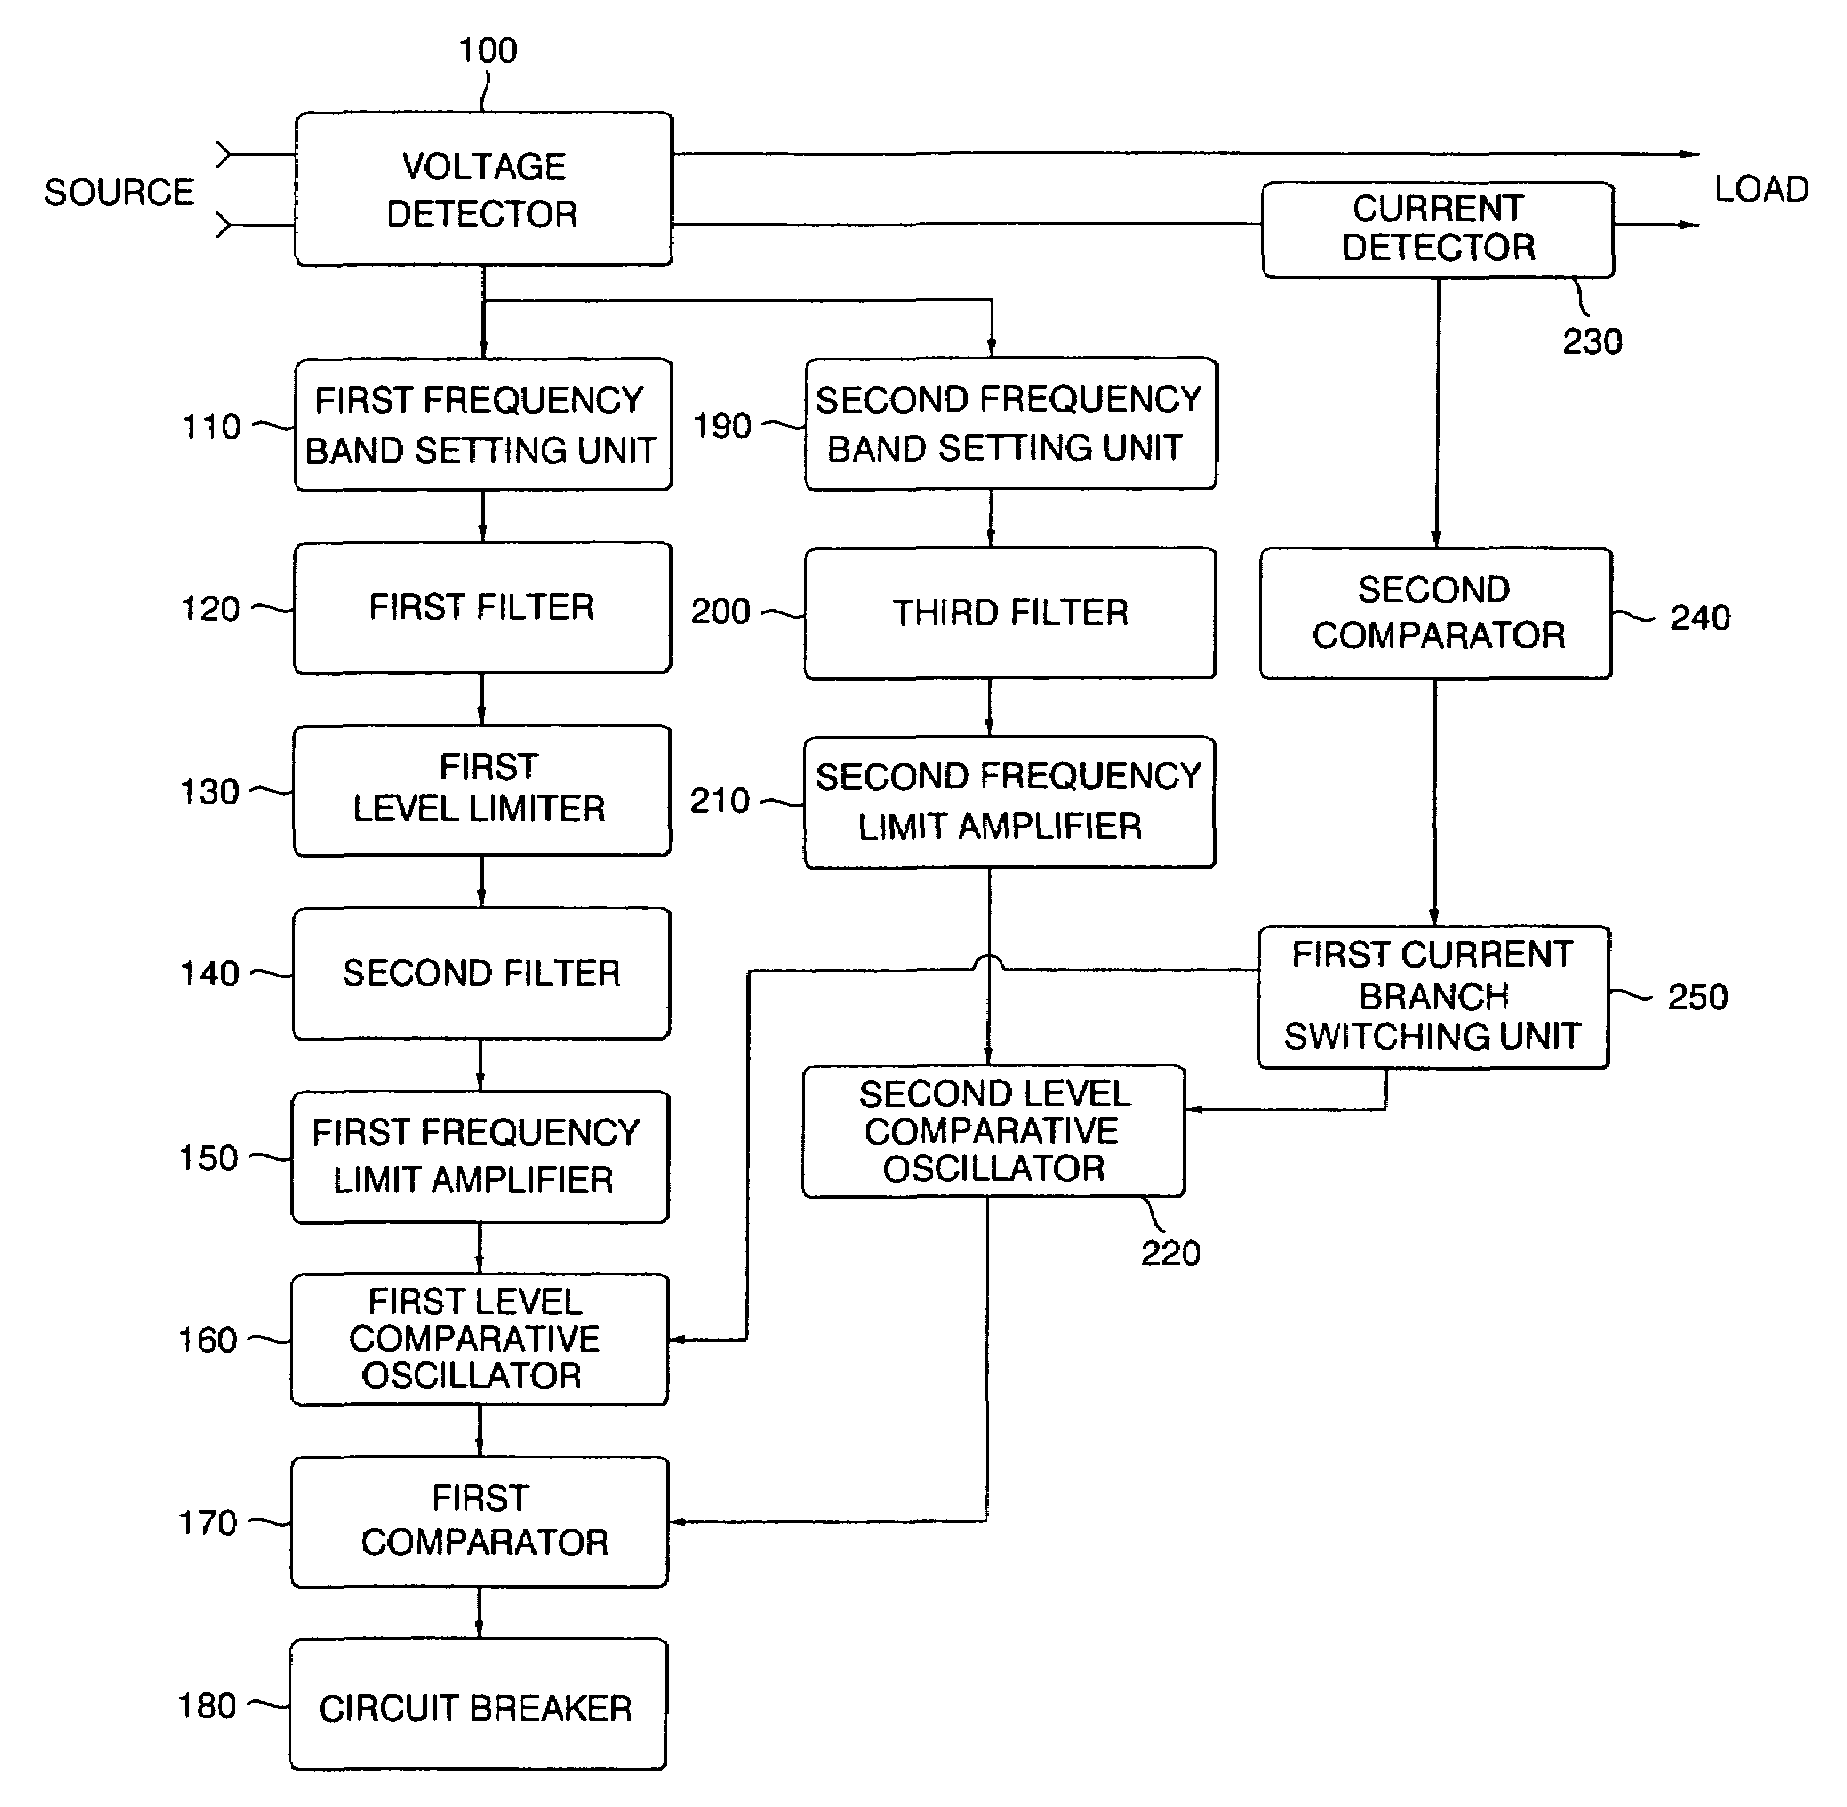 Apparatus for detecting arc fault